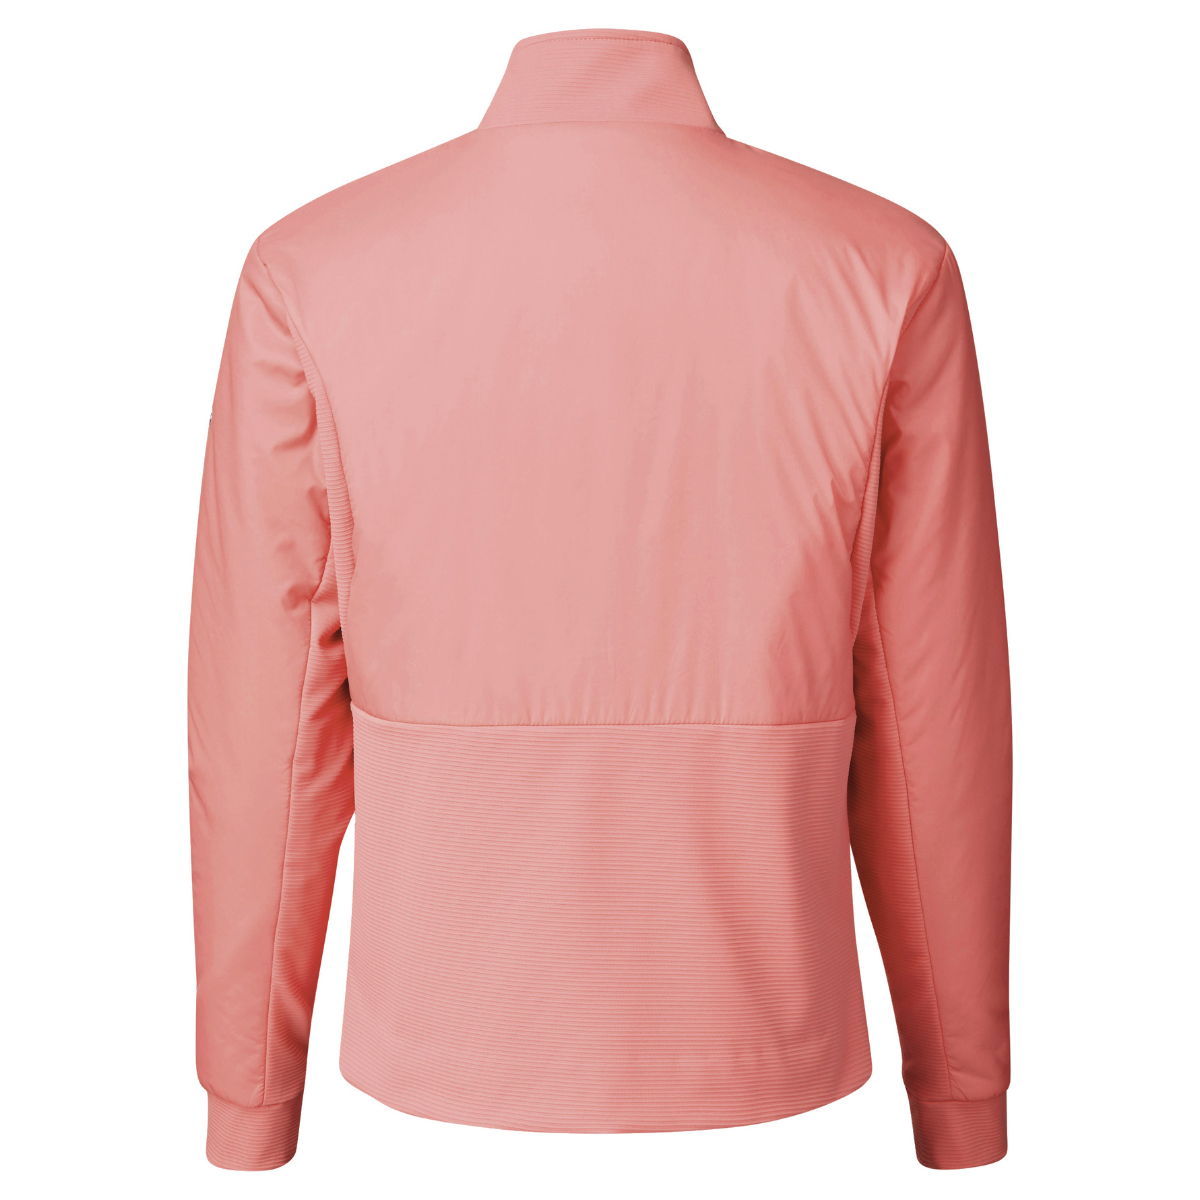 Daily Sports Debbie Jacket Coral